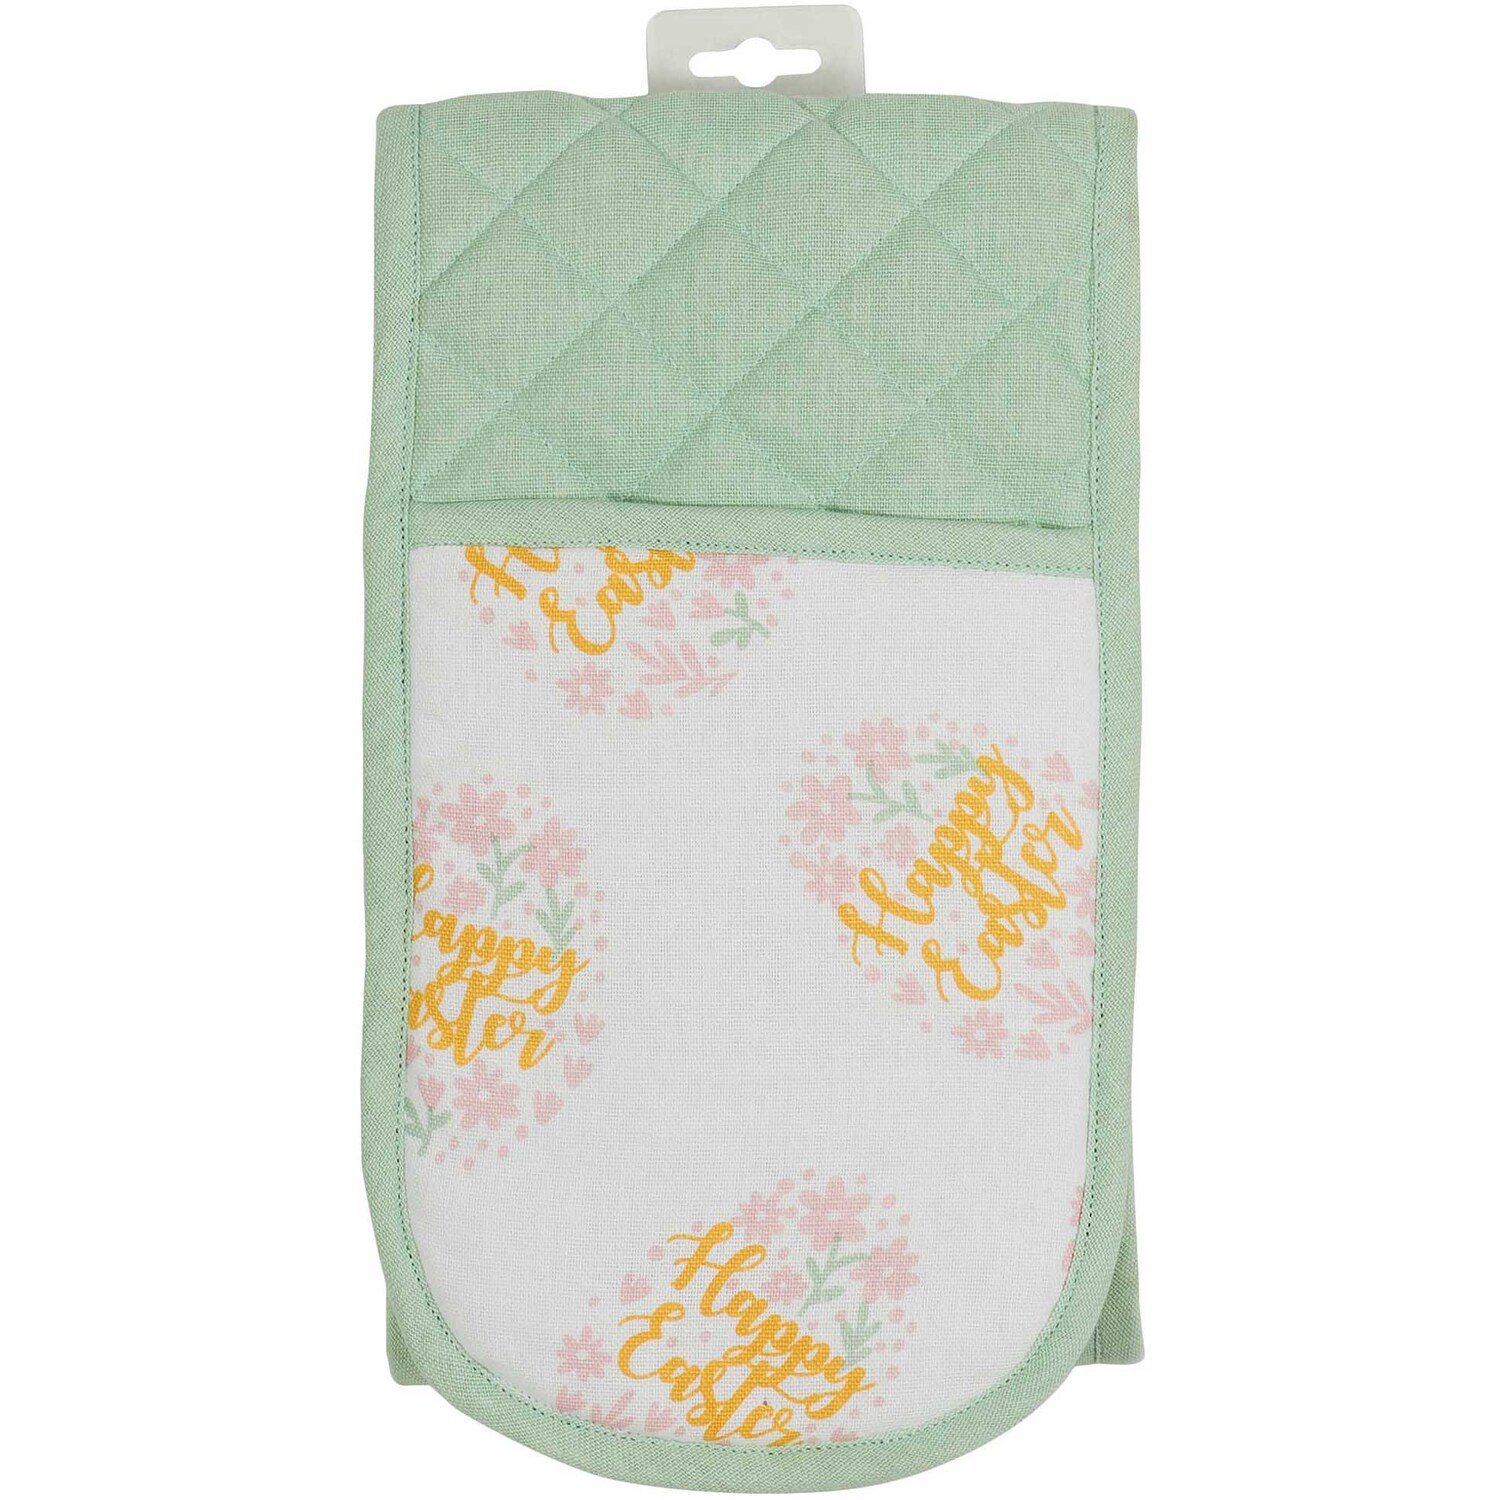 Happy Easter Double Oven Gloves - Green Image 1